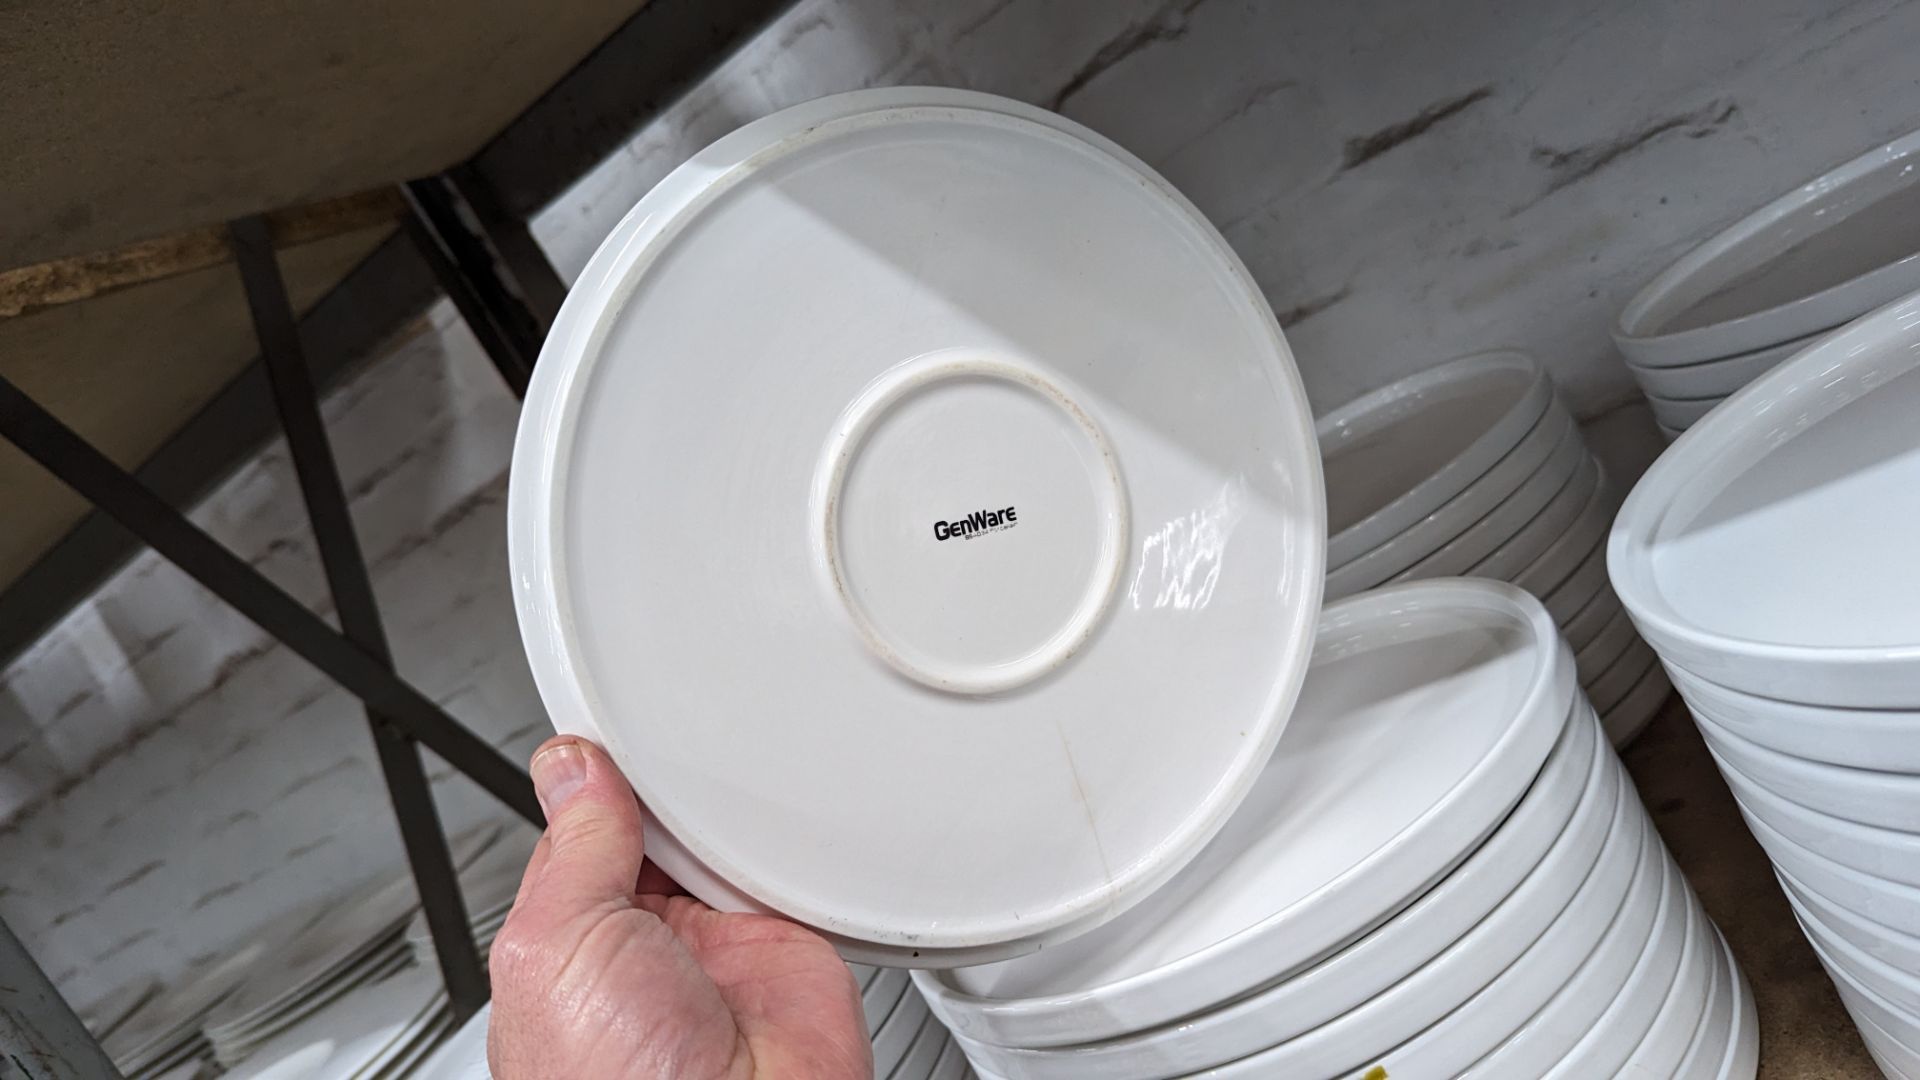 40 off Genware 245mm round flat plates with upright rim to the outer edge - Image 7 of 7